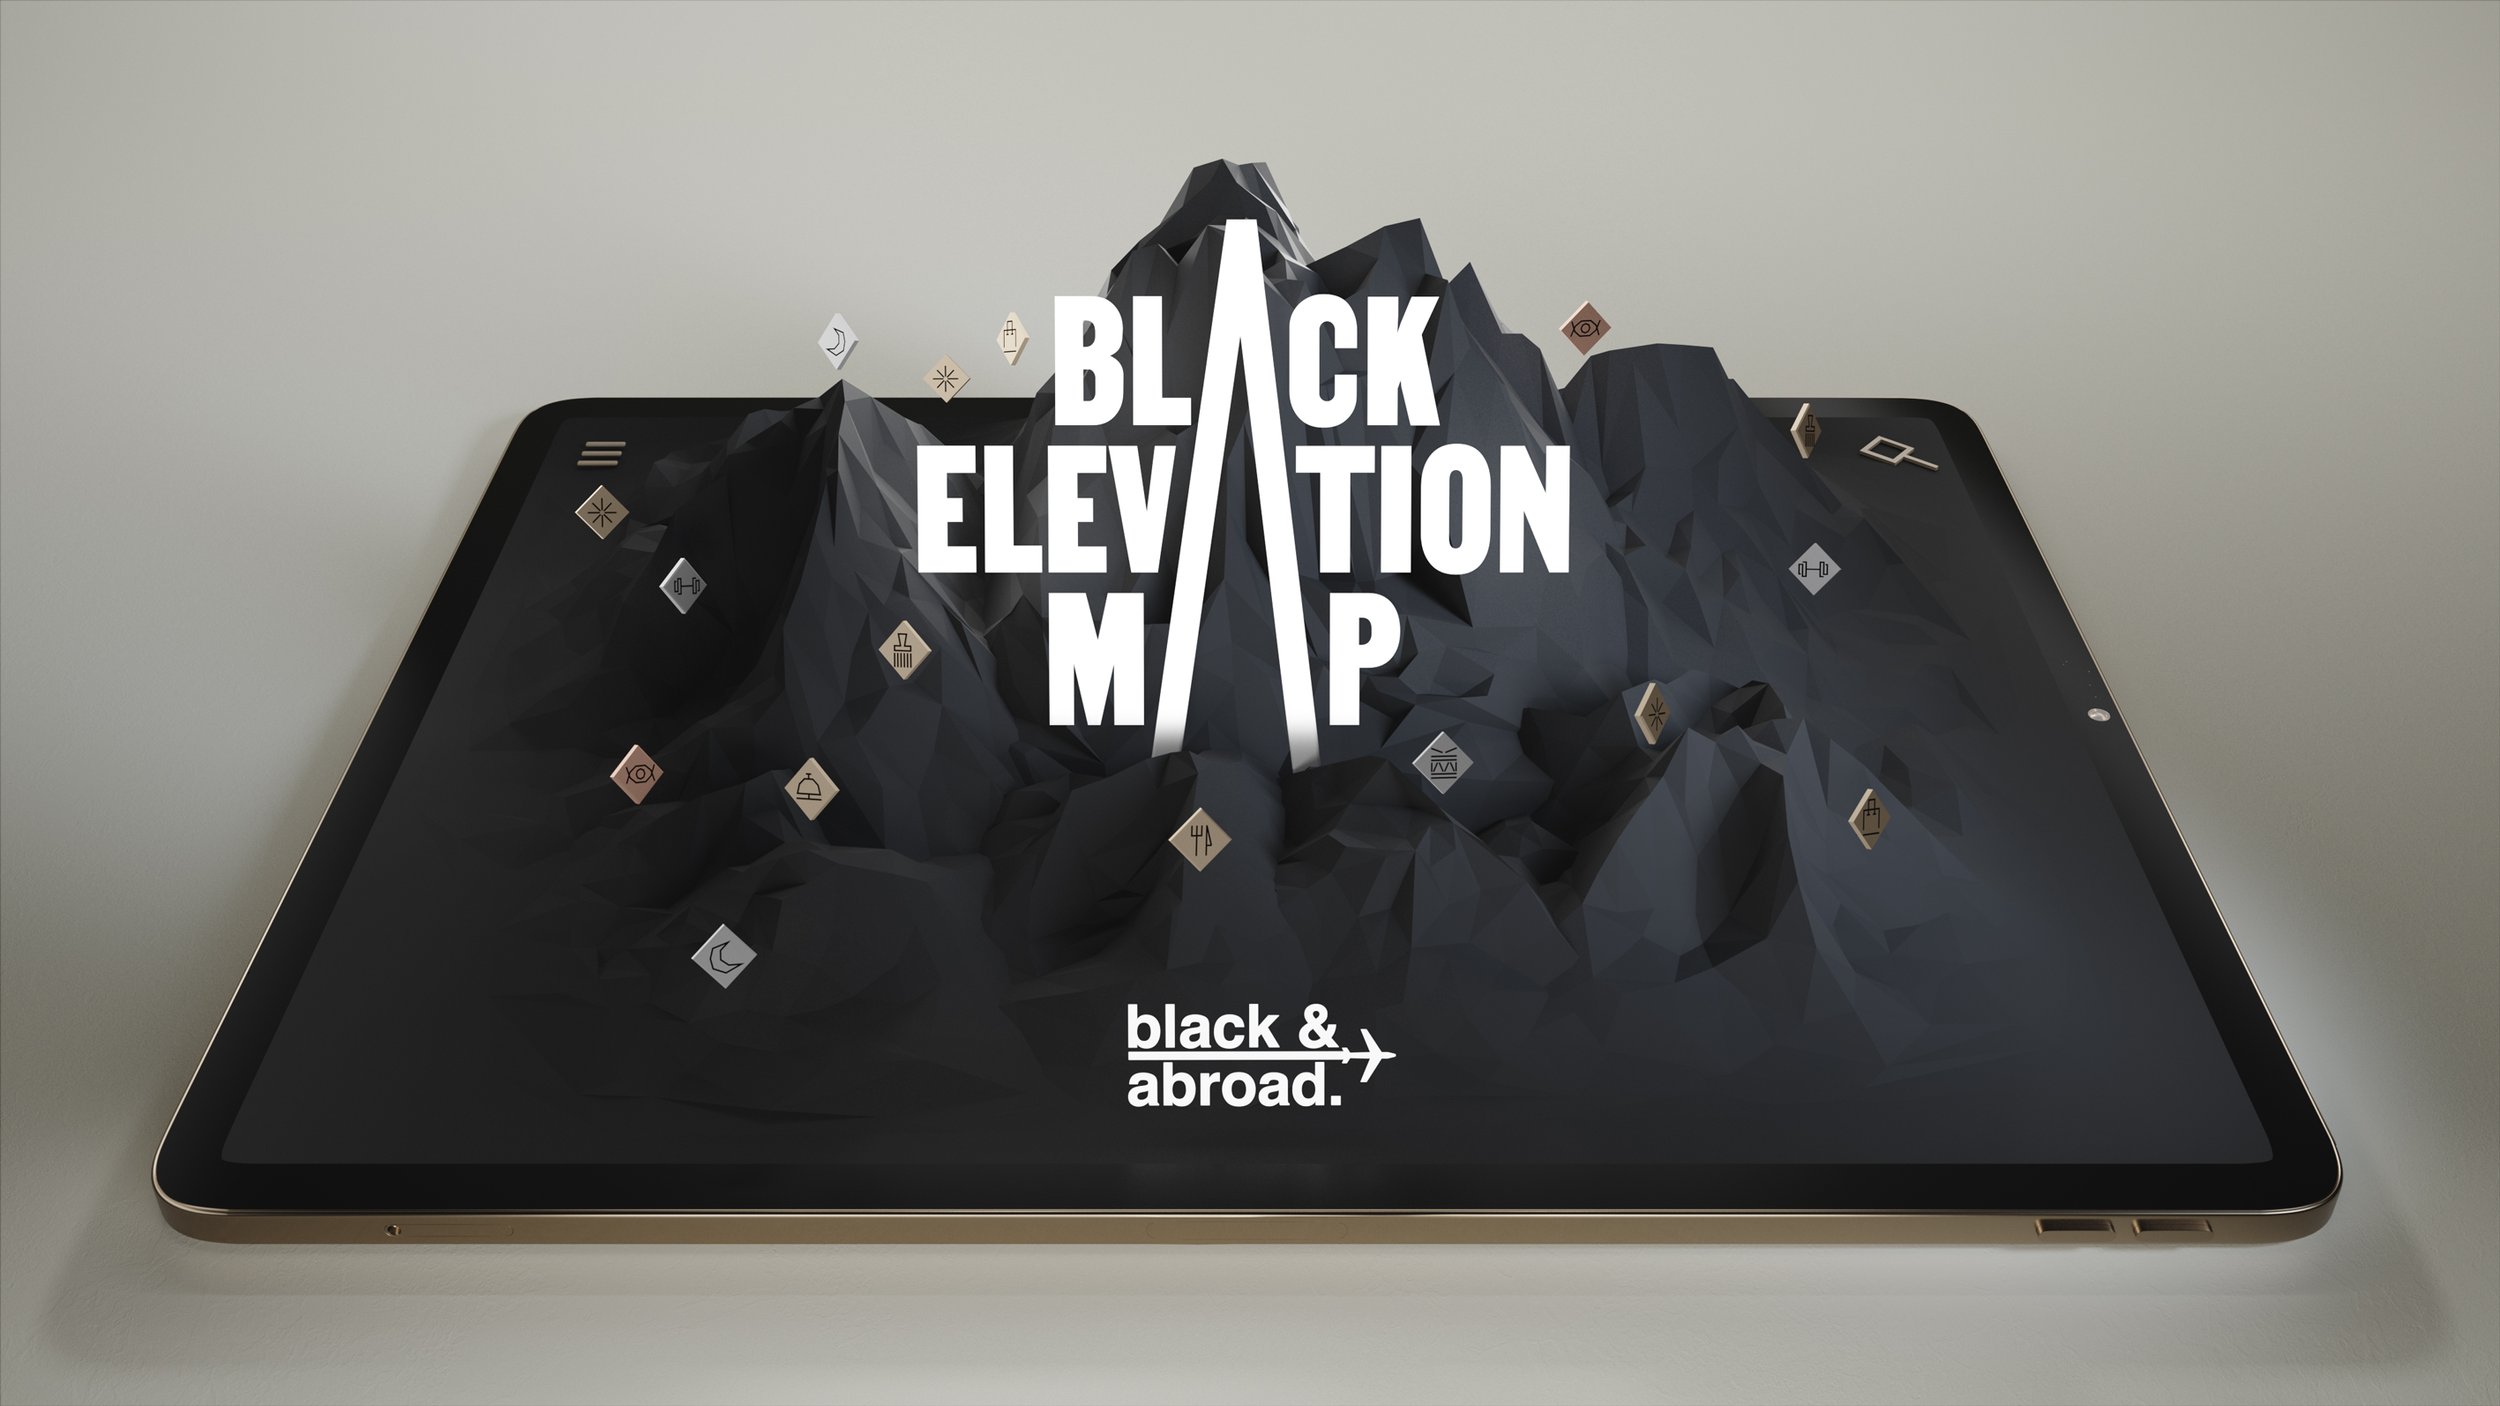 Black & Abroad Introduces the Black Elevation Map — Black & Abroad